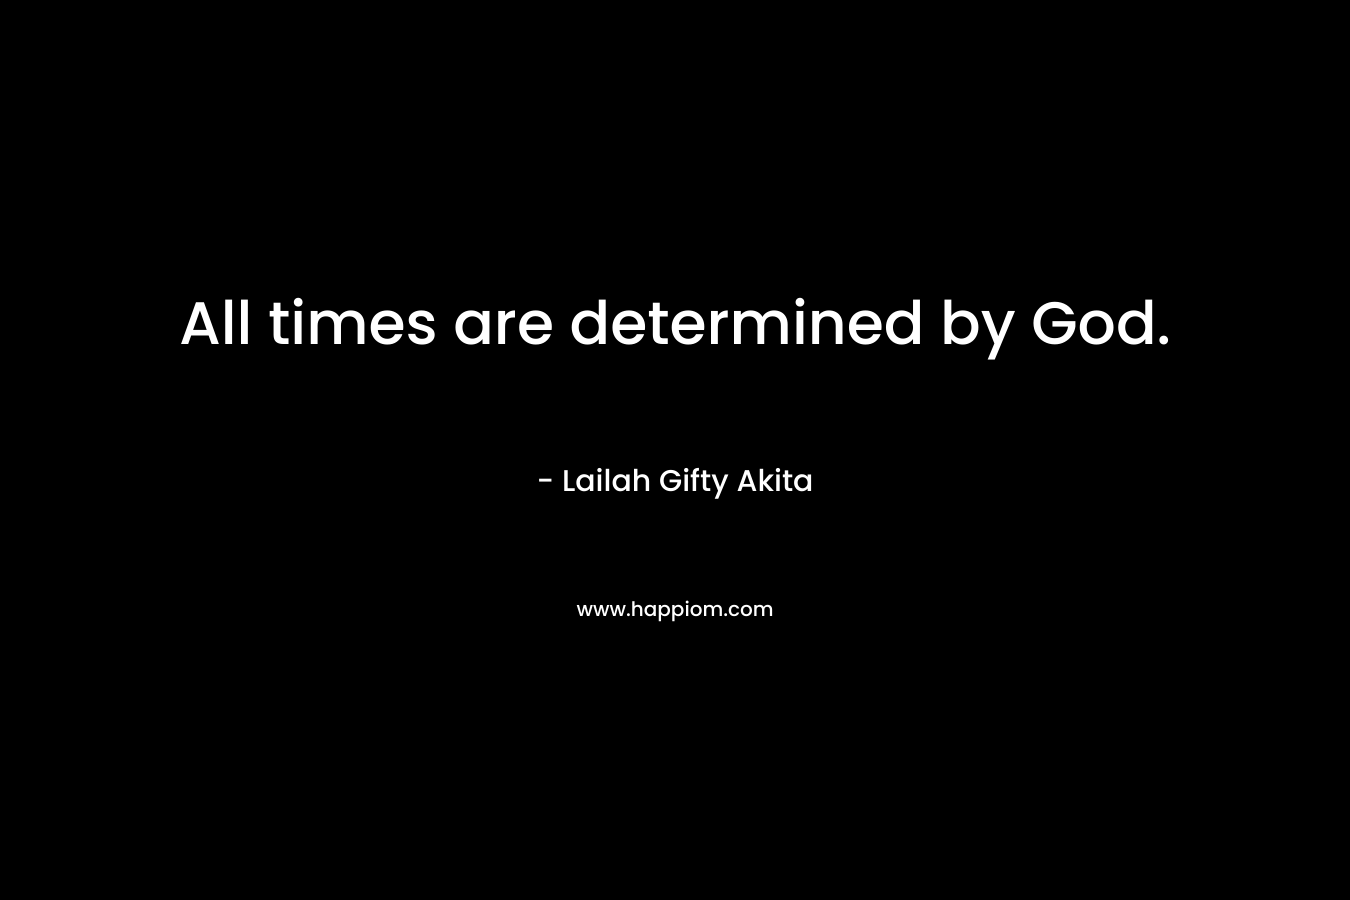 All times are determined by God.